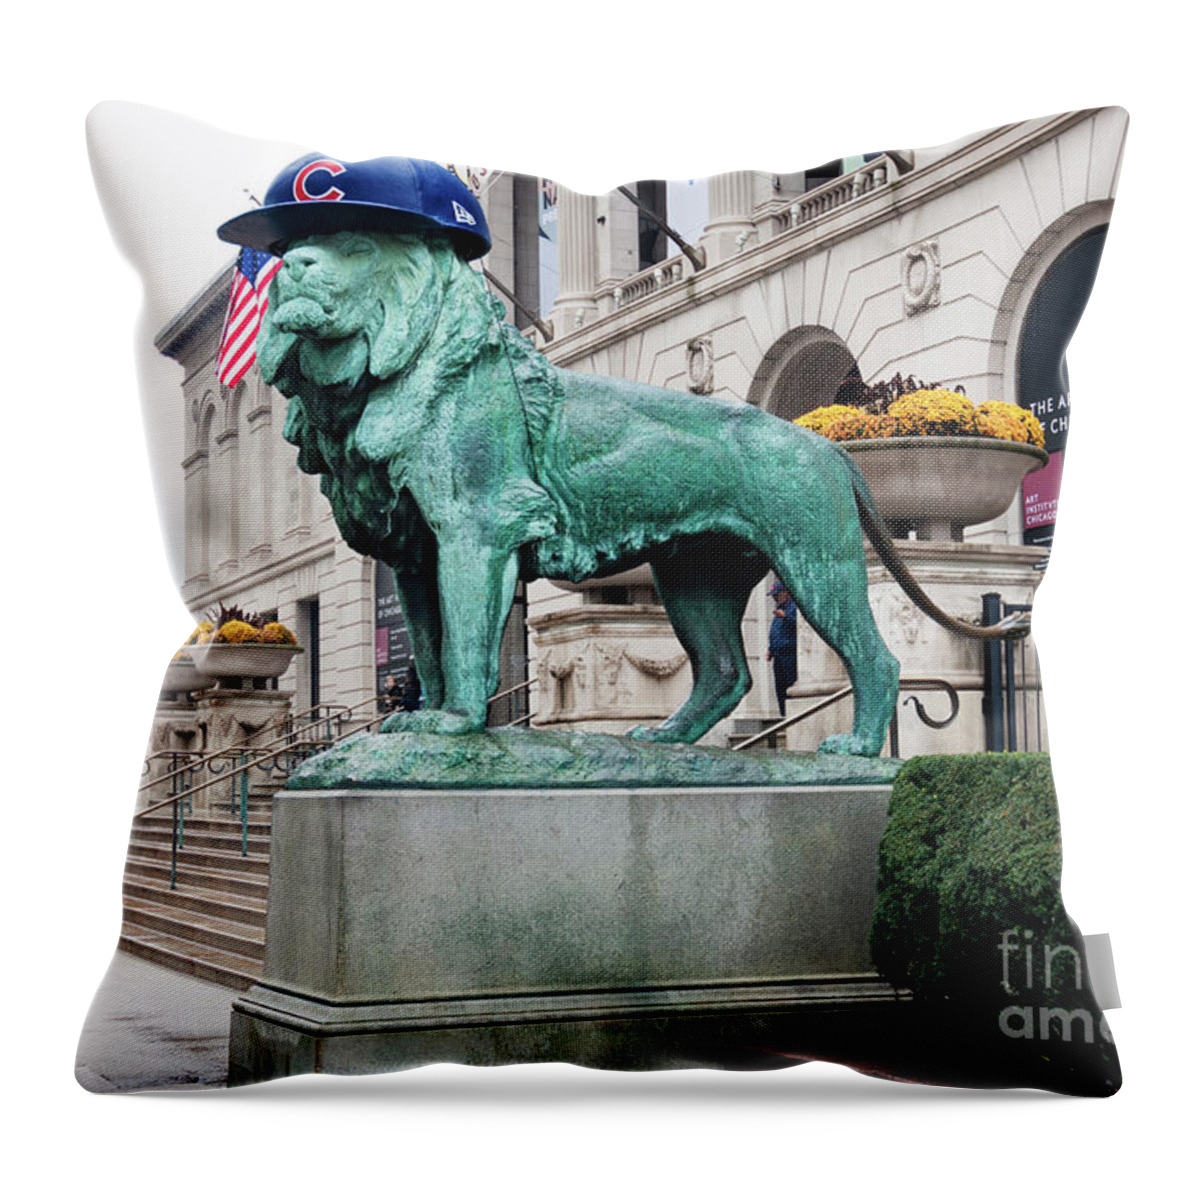 Cubbies Lions Throw Pillow featuring the photograph Cubs Lions by Patty Colabuono